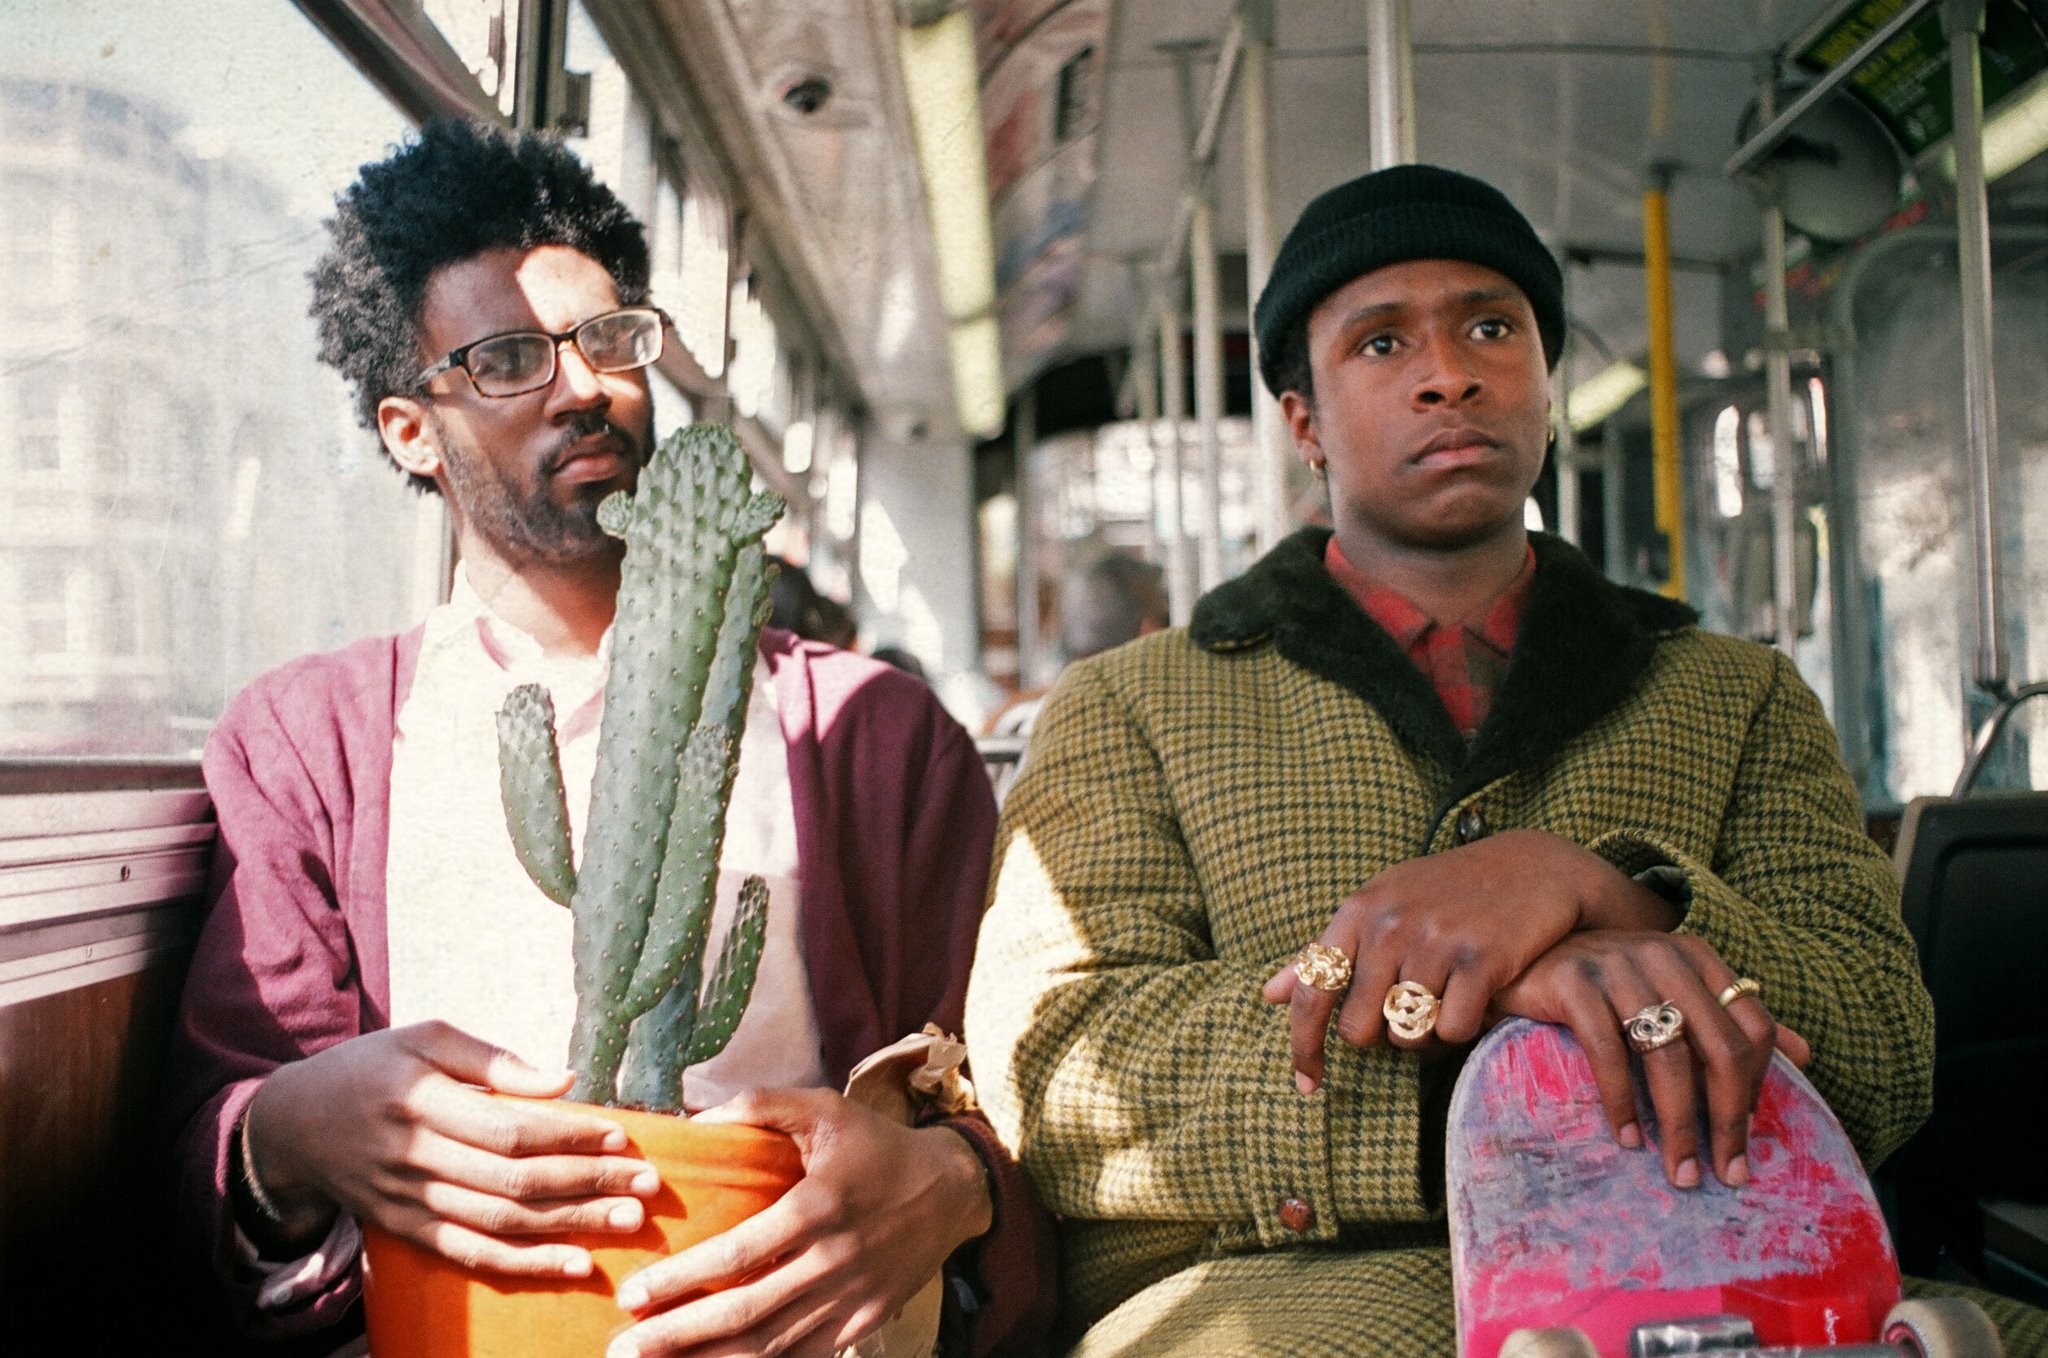 Still image from "The Last Black Man in San Francisco" starring Jimmie Fails (right) and Pretice Sanders (left) and directed by Joe Talbot. 